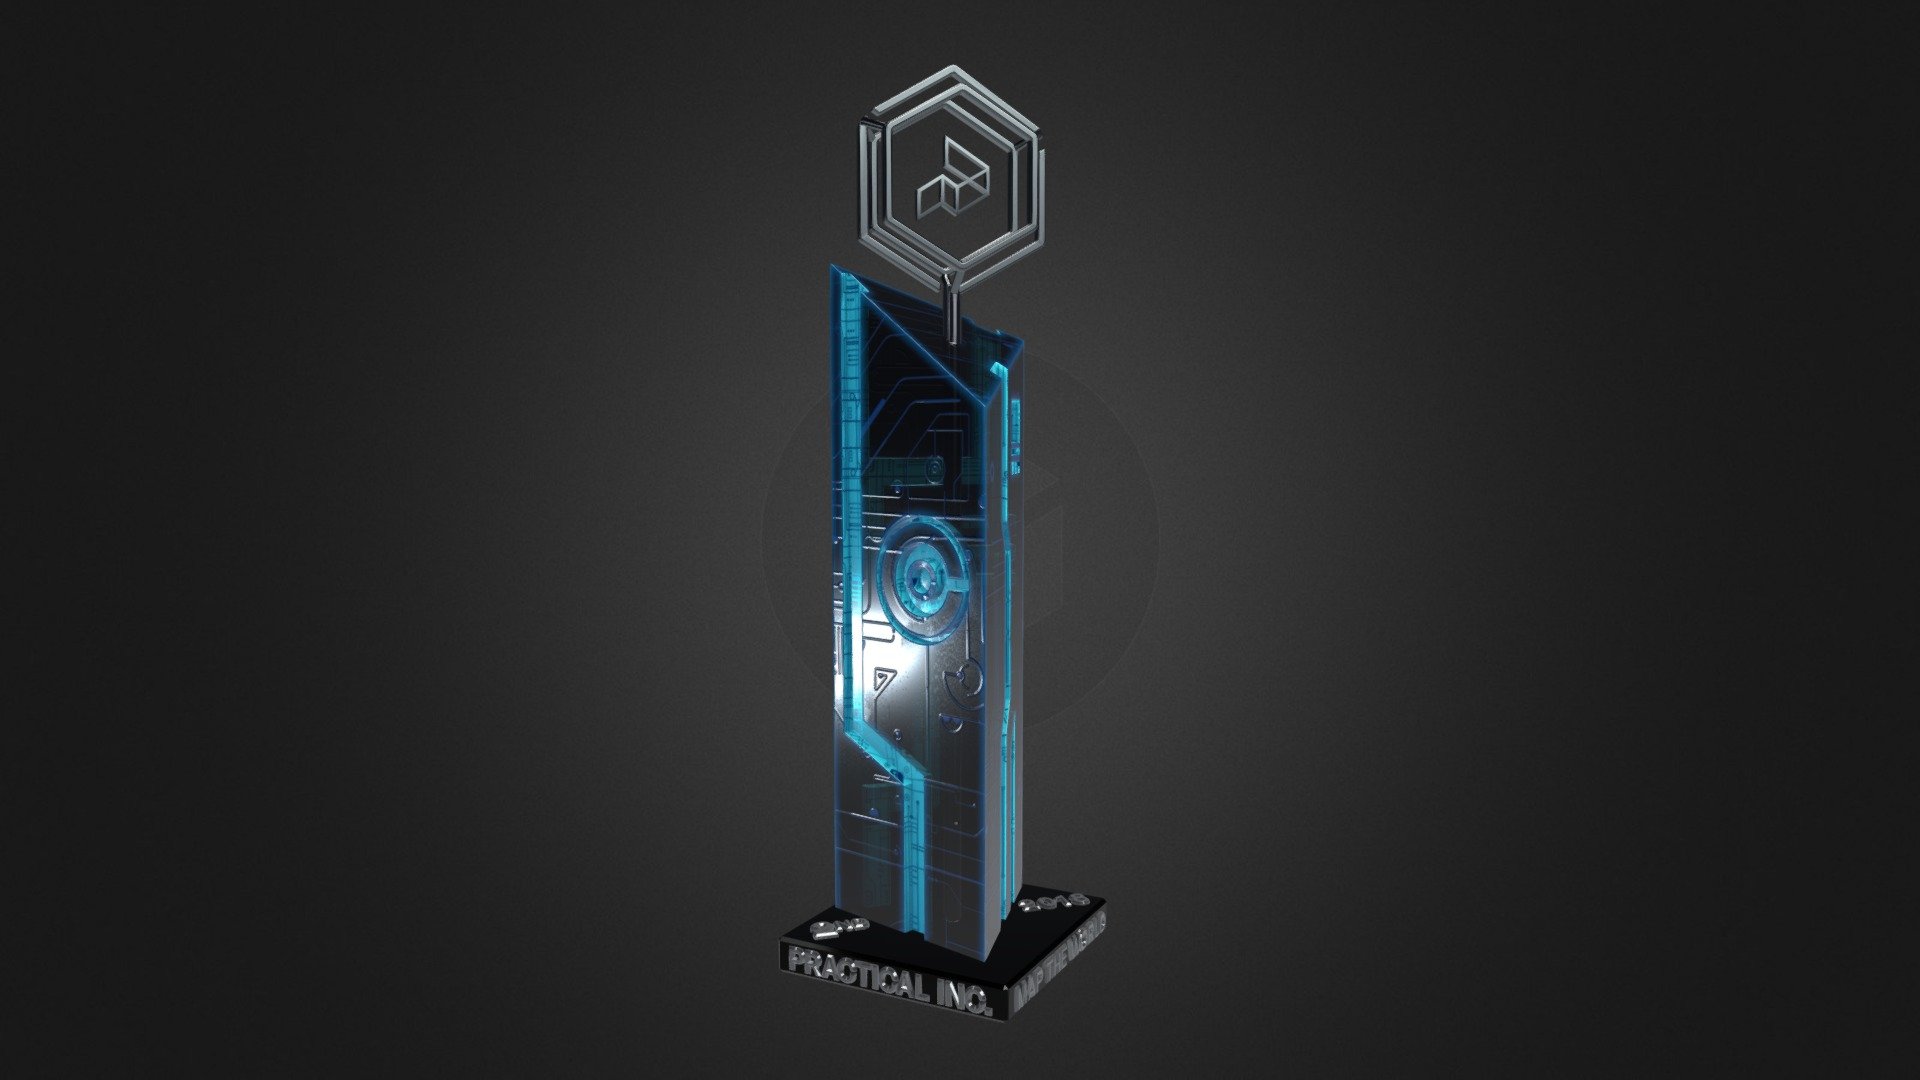 A cool, clean design for the rare 2018 asset and 2nd place win. The winner will recieve the Grand Prizes and this digital asset for their collection. Visit: https://leaderboard.practicalvr.com/leaderboard and register to enter. HoloLens reqired, contest rules and prizes in the link 3d model